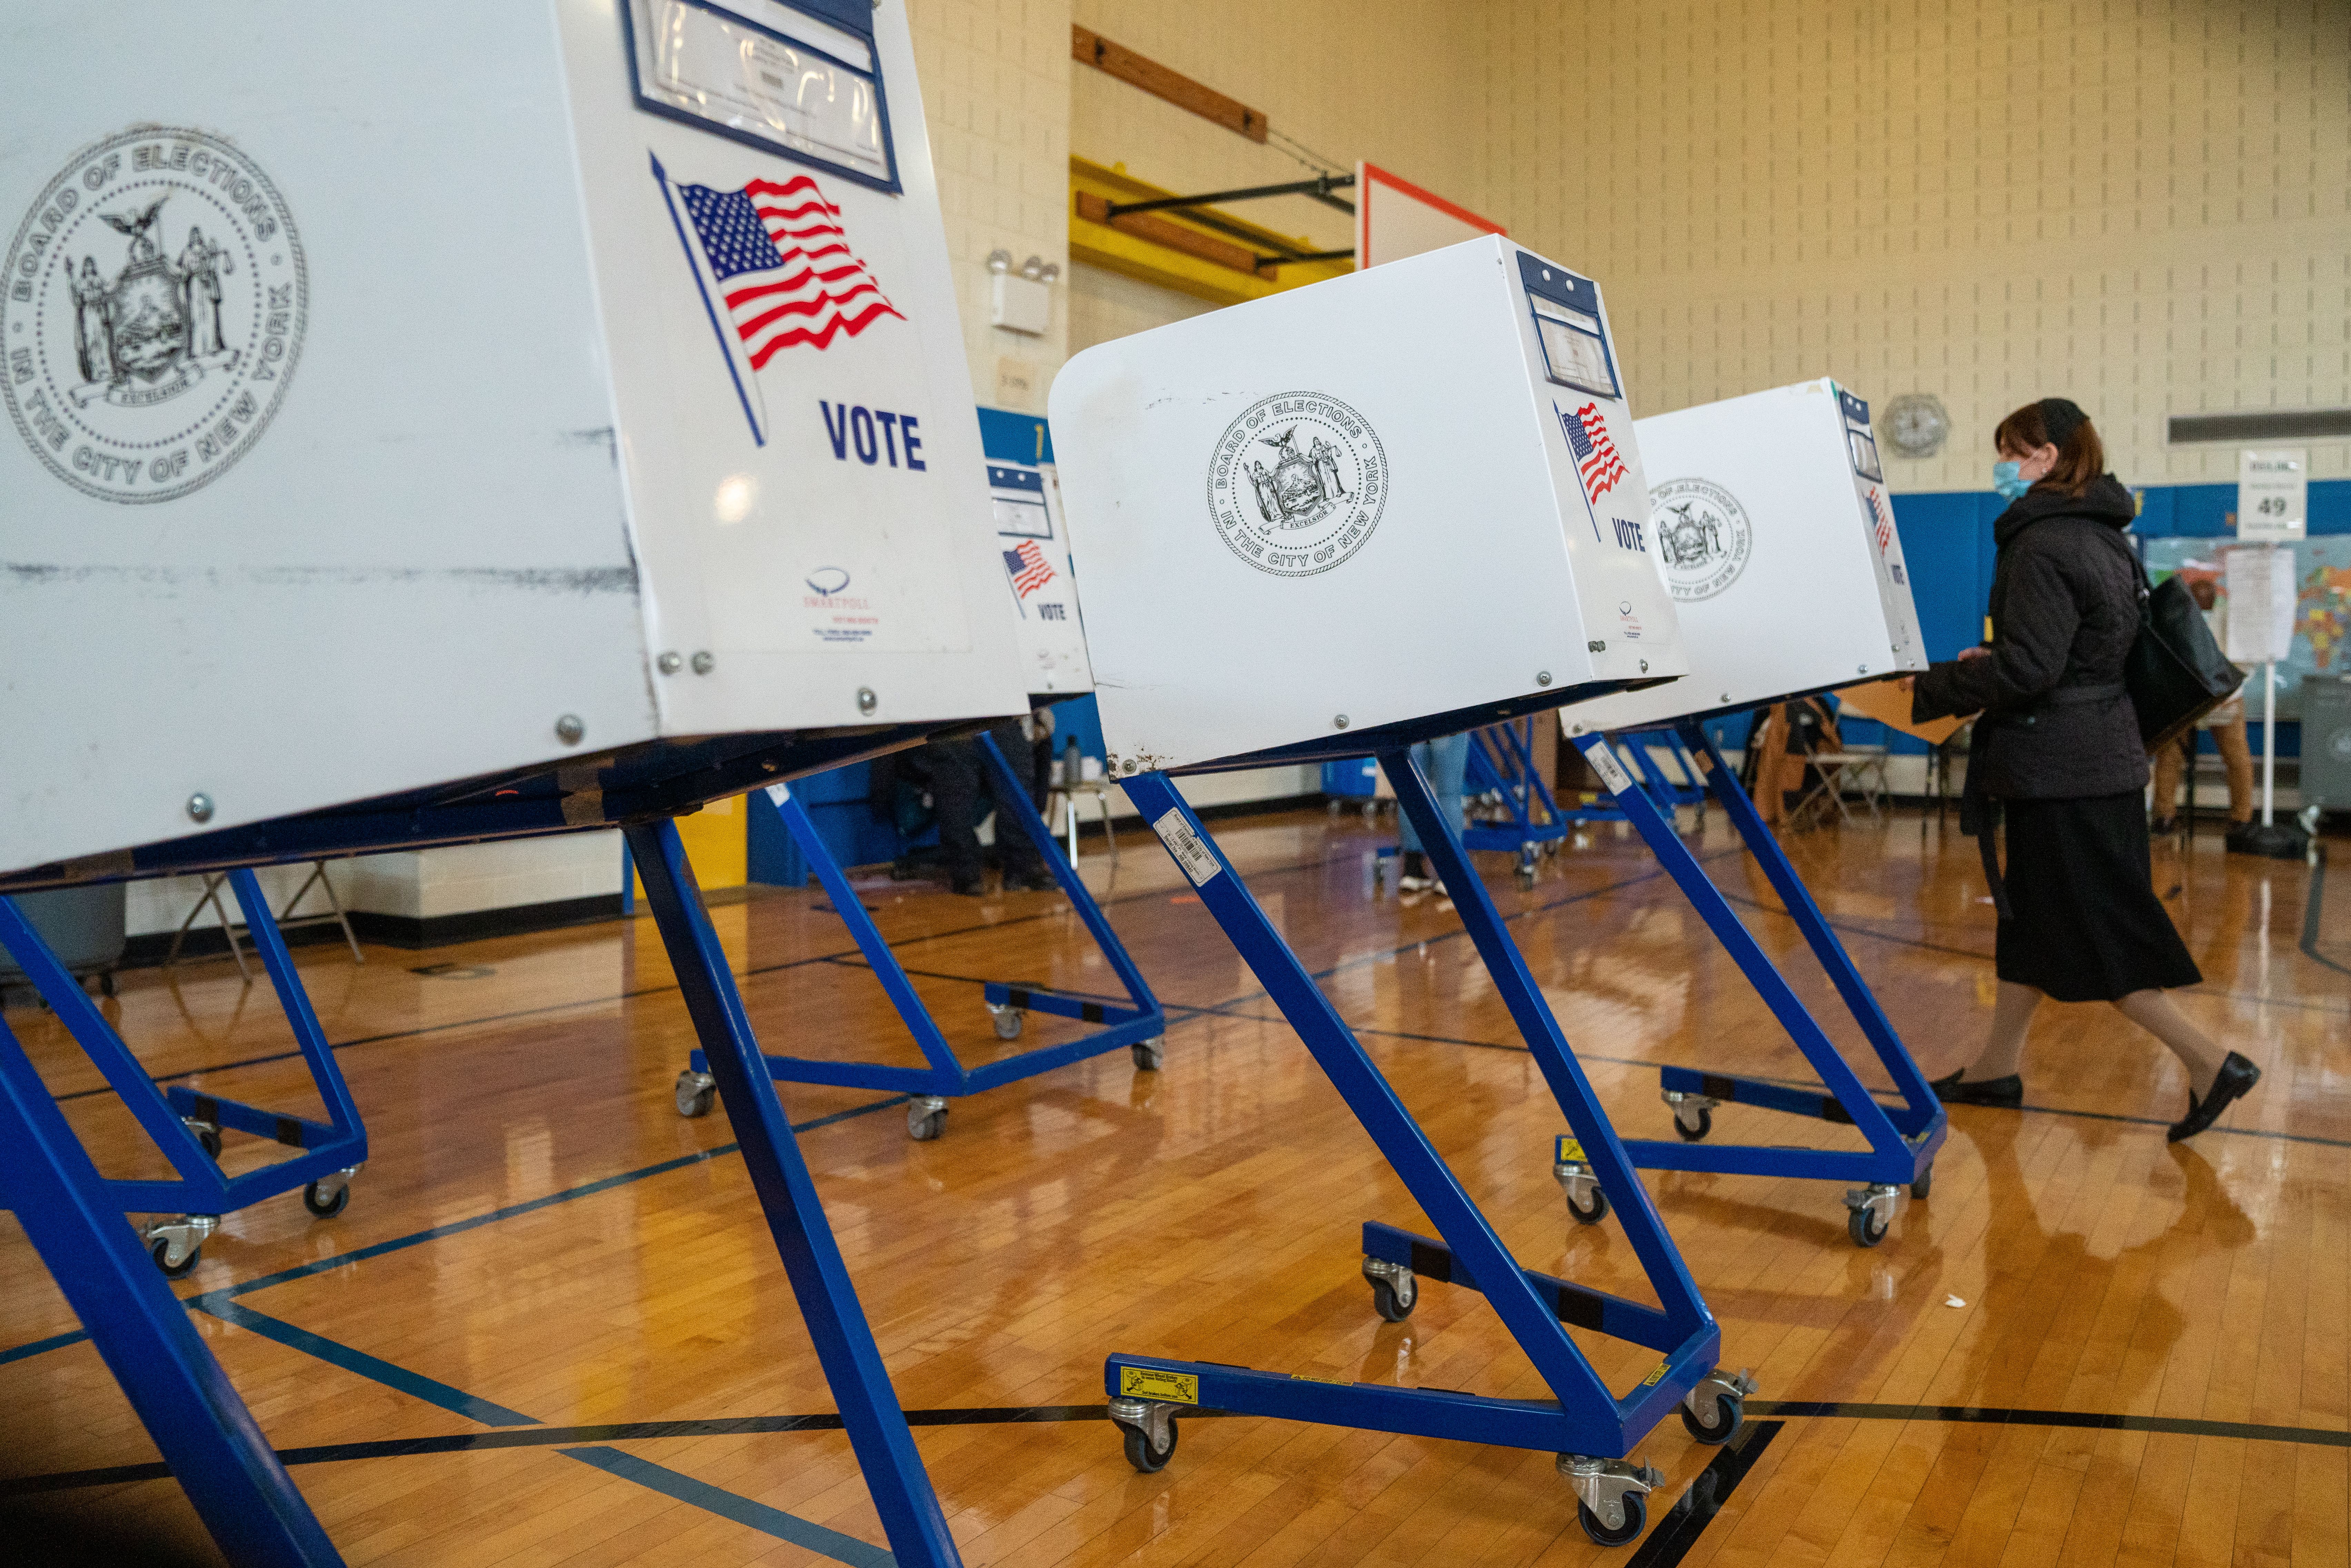 An image of voting booths.